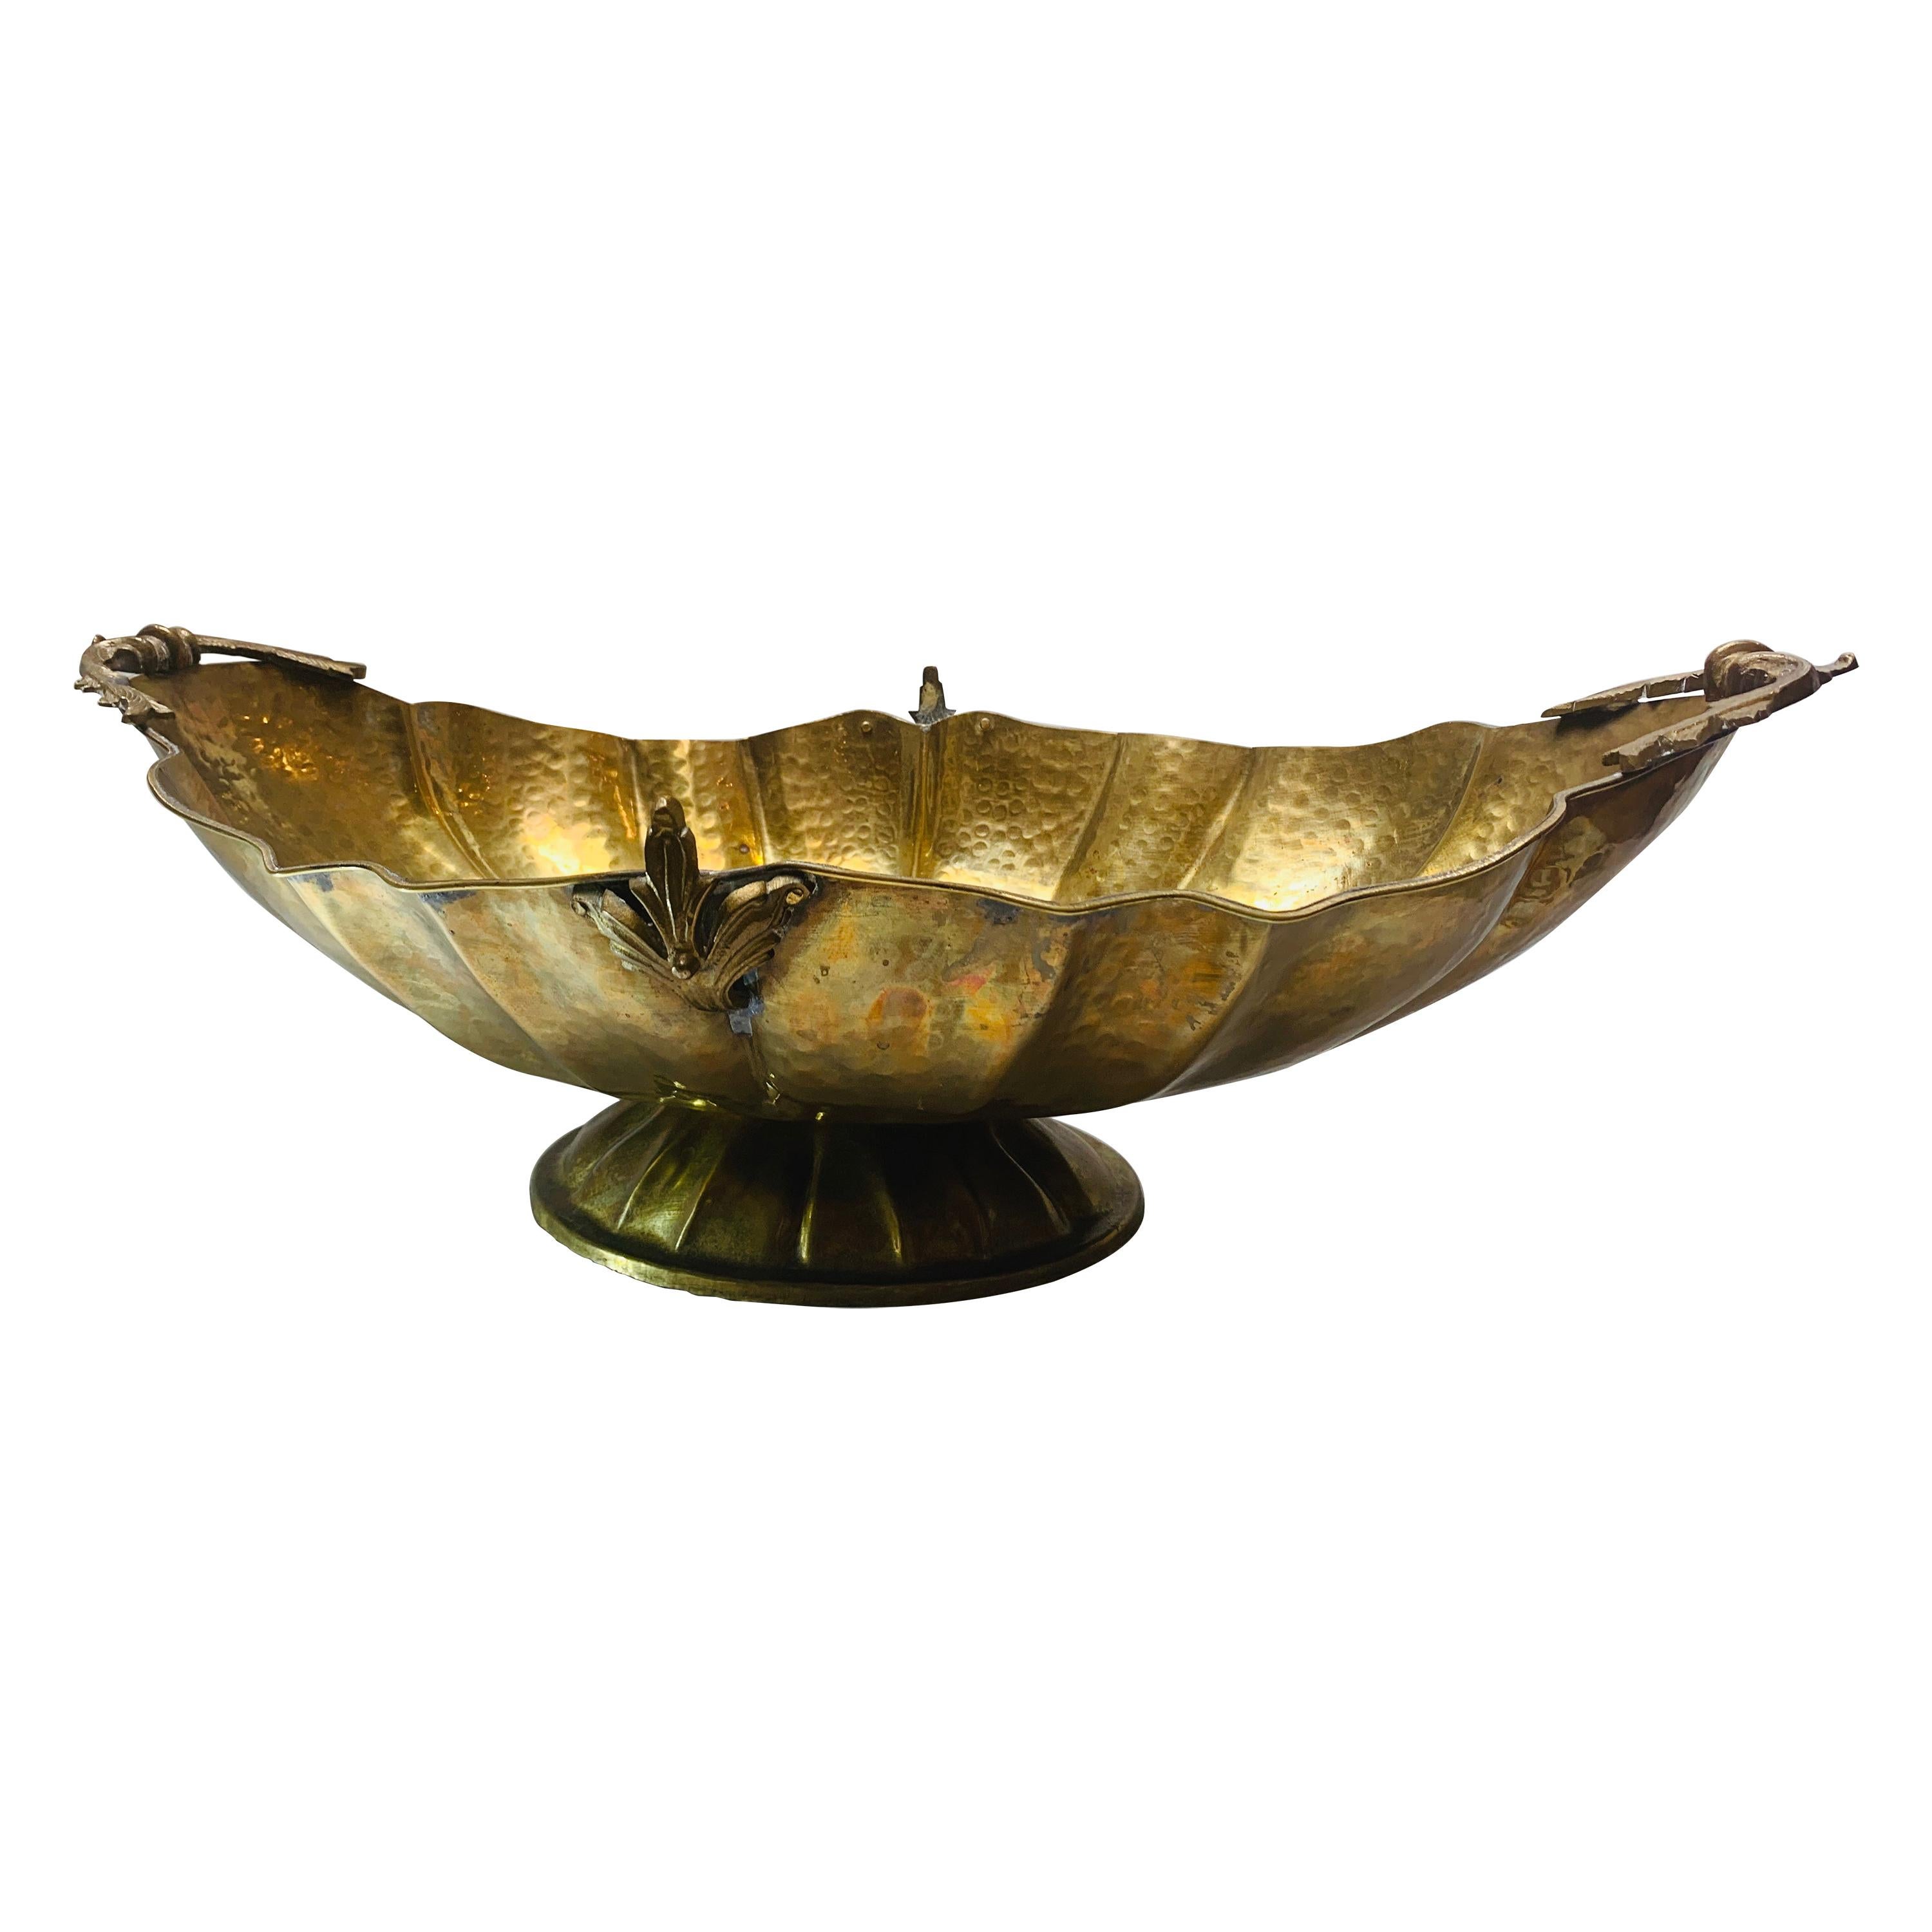 Hollywood Regency, Oval Scalloped 19th Century Hammered Brass Tureen